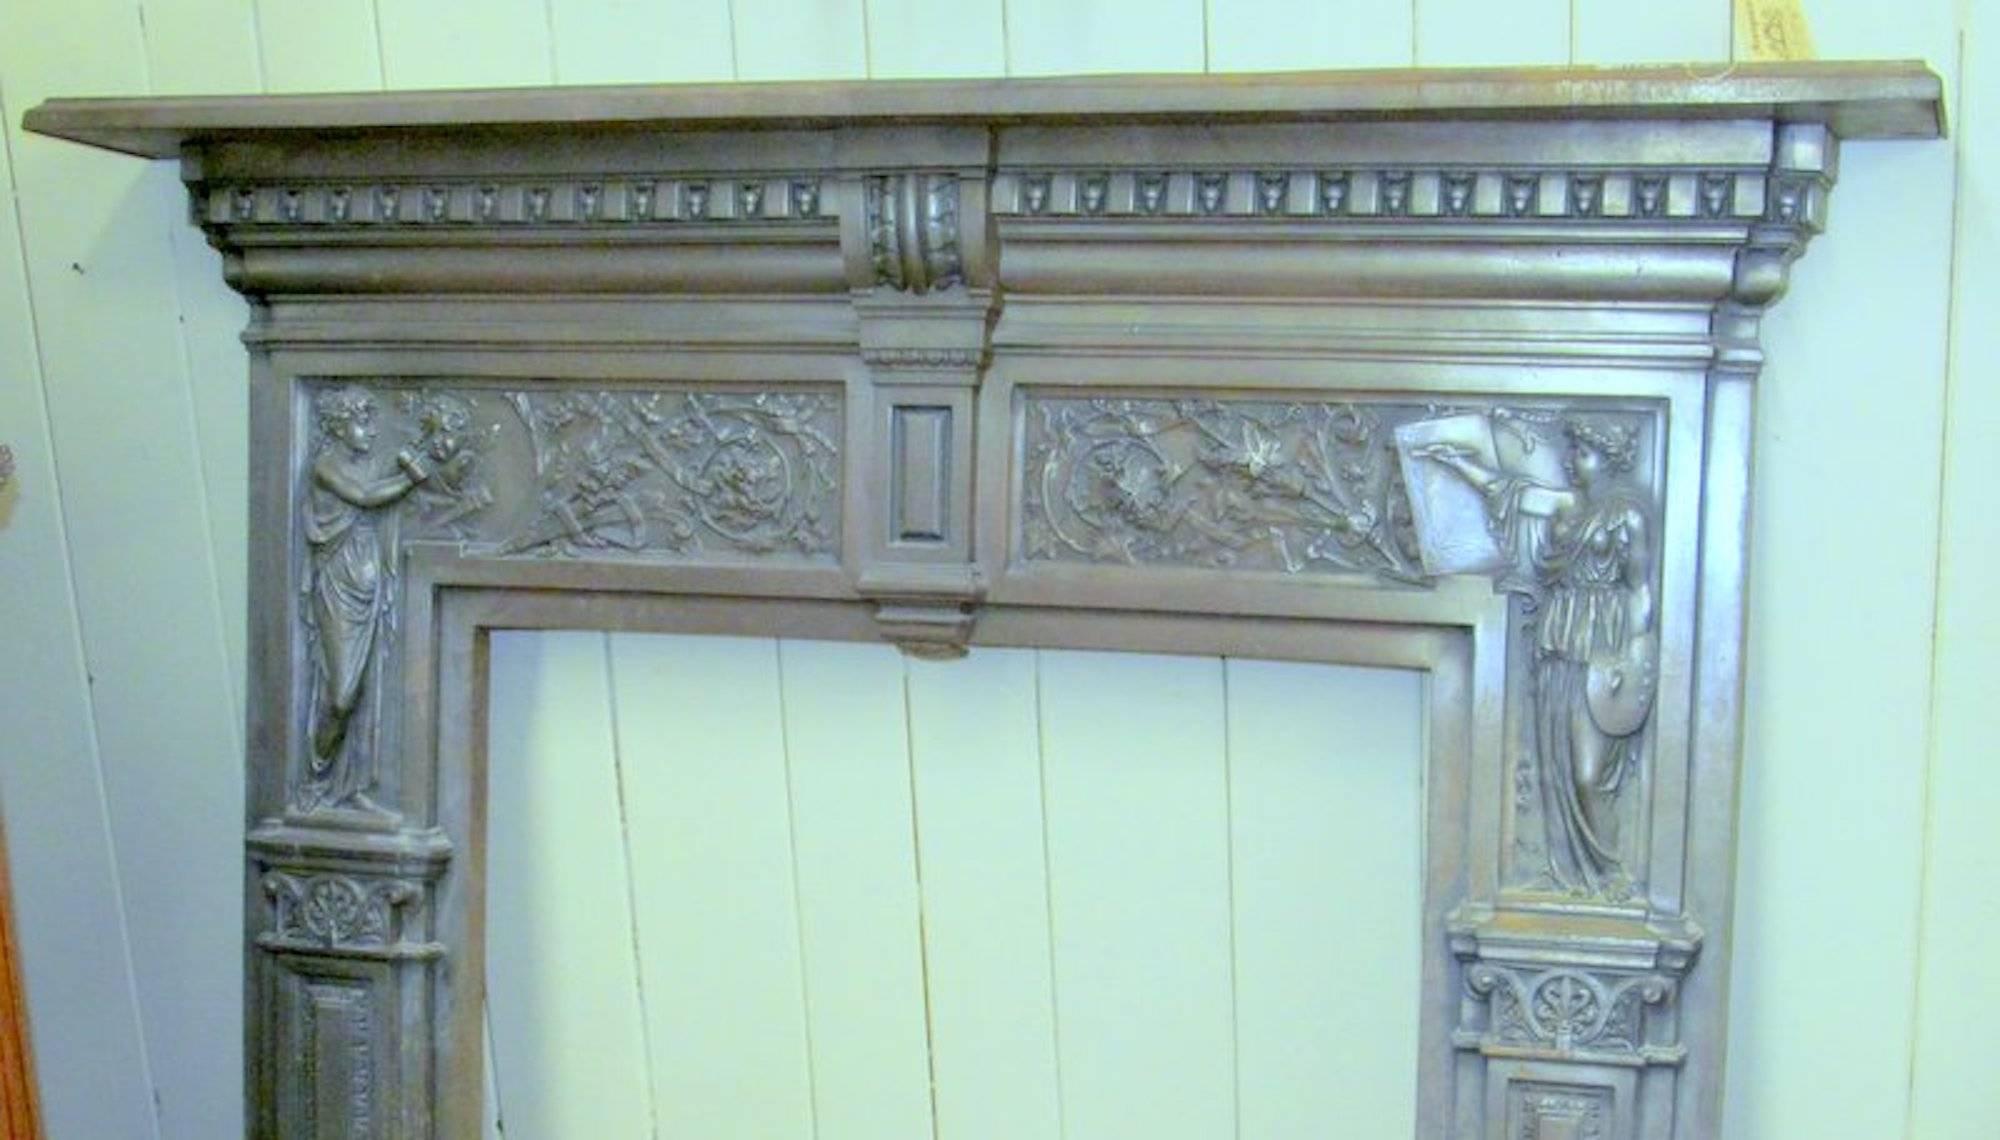 Rare and important antique English Young and Marten burnished steel neoclassical fireplace mantel

Opening dimensions 36